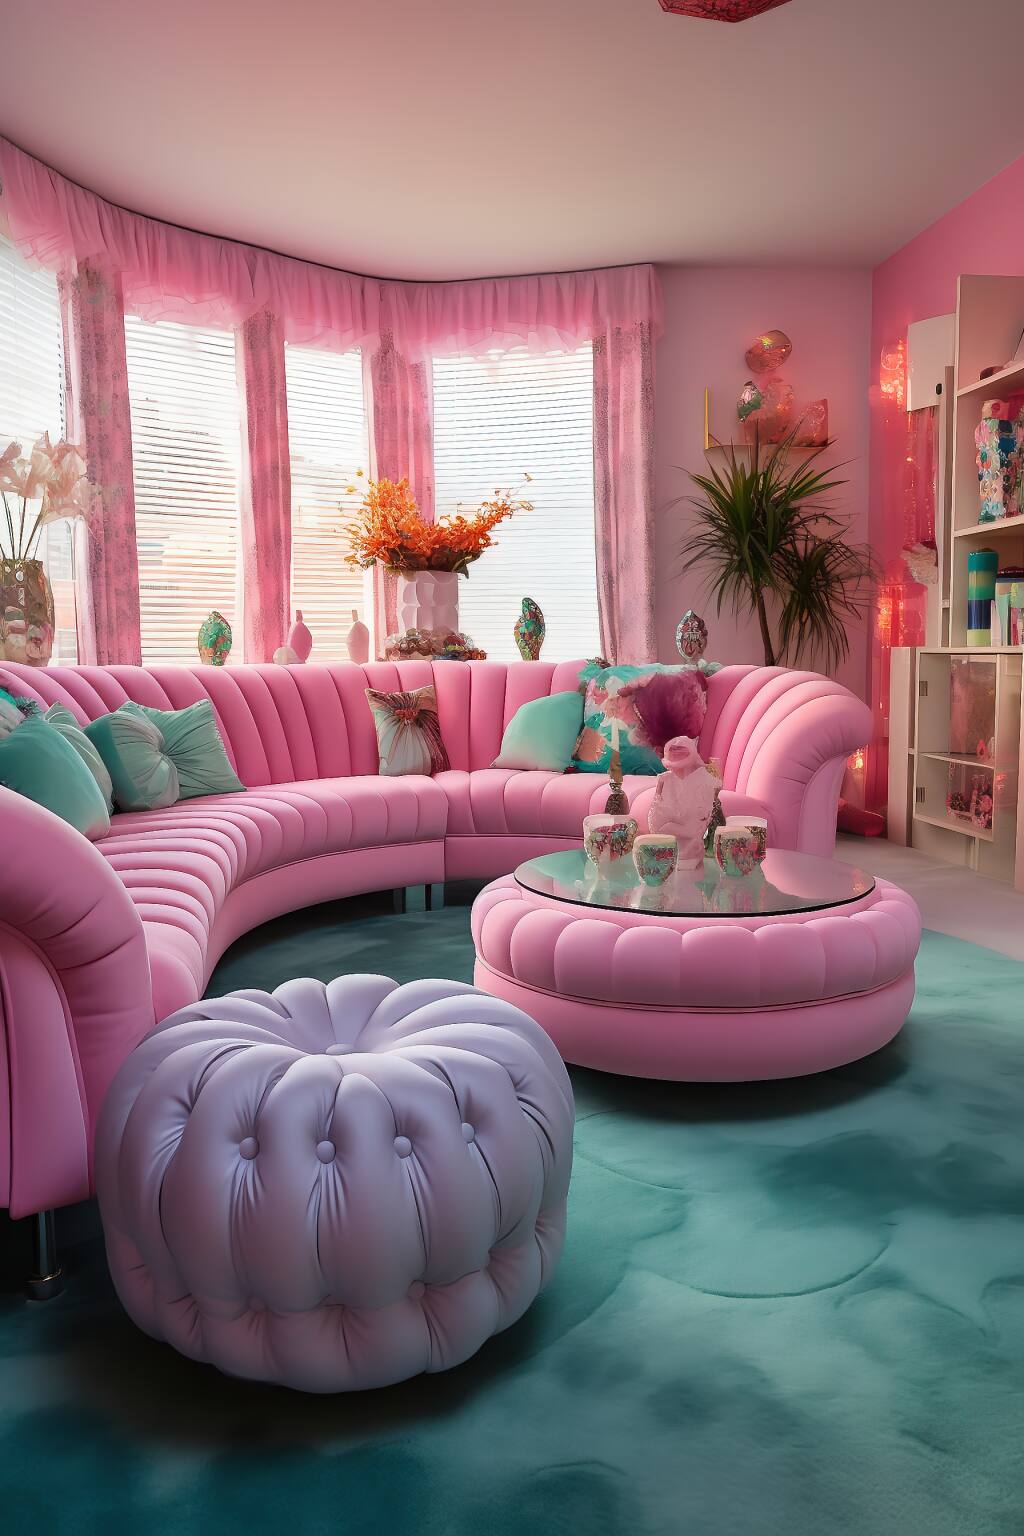 A Romantic  Retro Living Room With Pink Curved Sofas, Pink Tufted Ottomans, And A Teal Rug Under Soft Lighting.